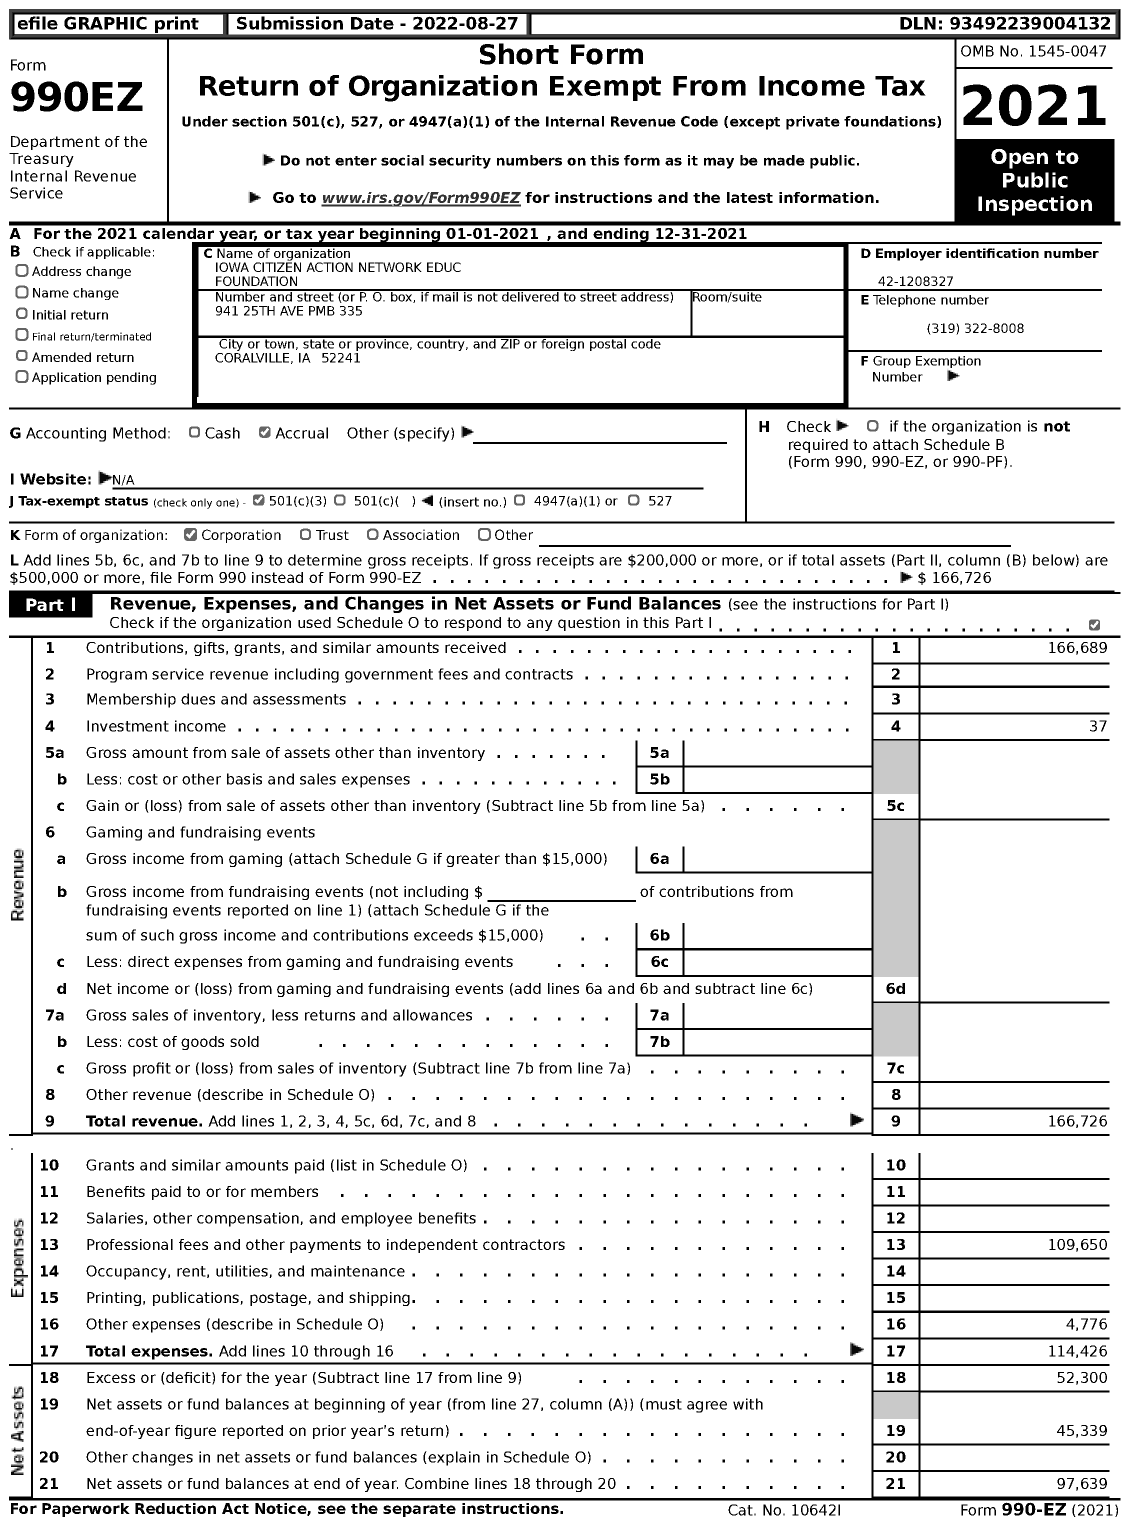 Image of first page of 2021 Form 990EZ for Iowa Citizen Action Network Educ Foundation